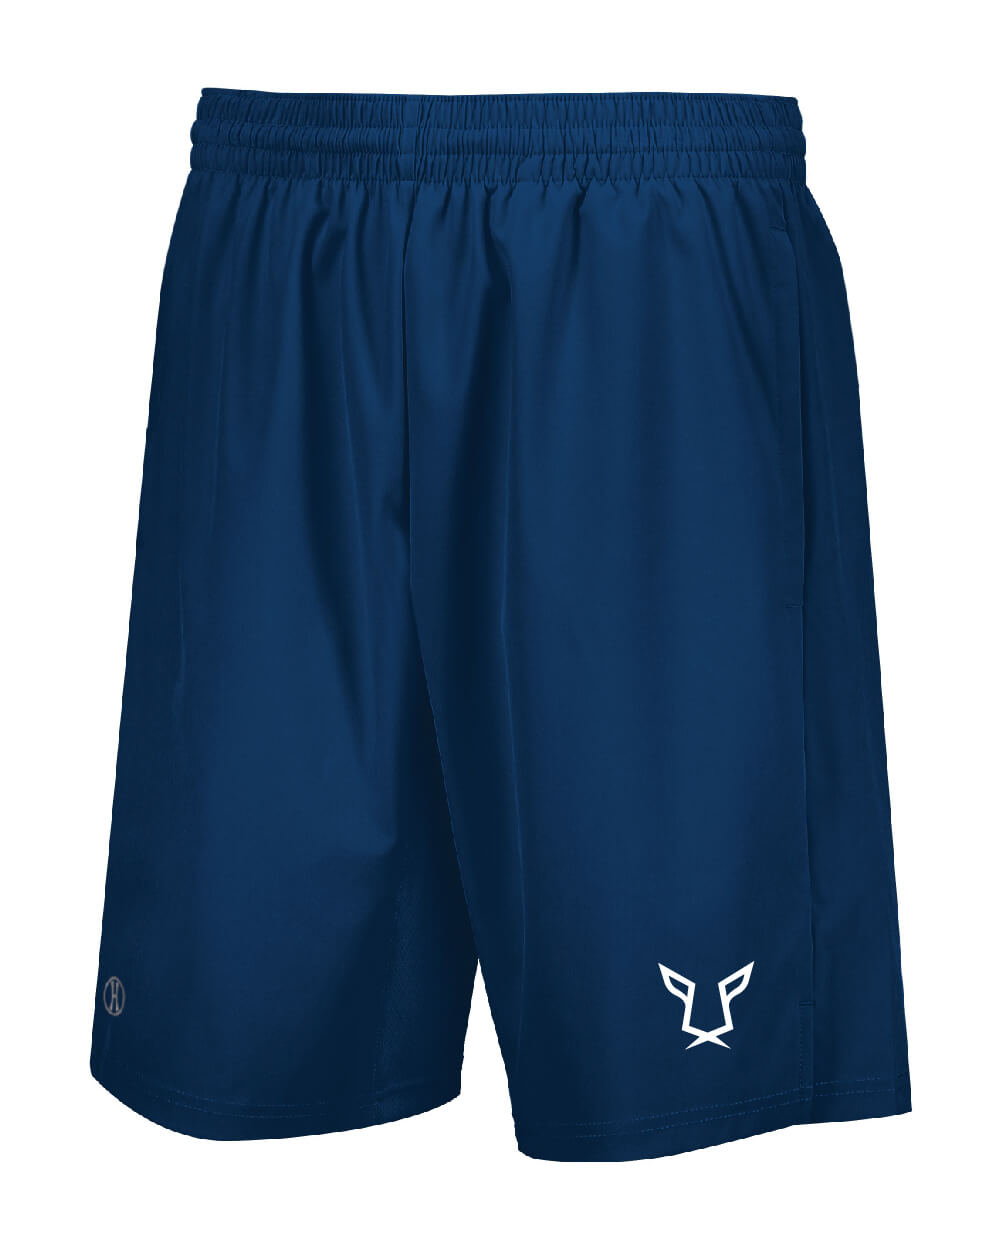 Men's Navy Evolution Performance Shorts by Odisi Apparel